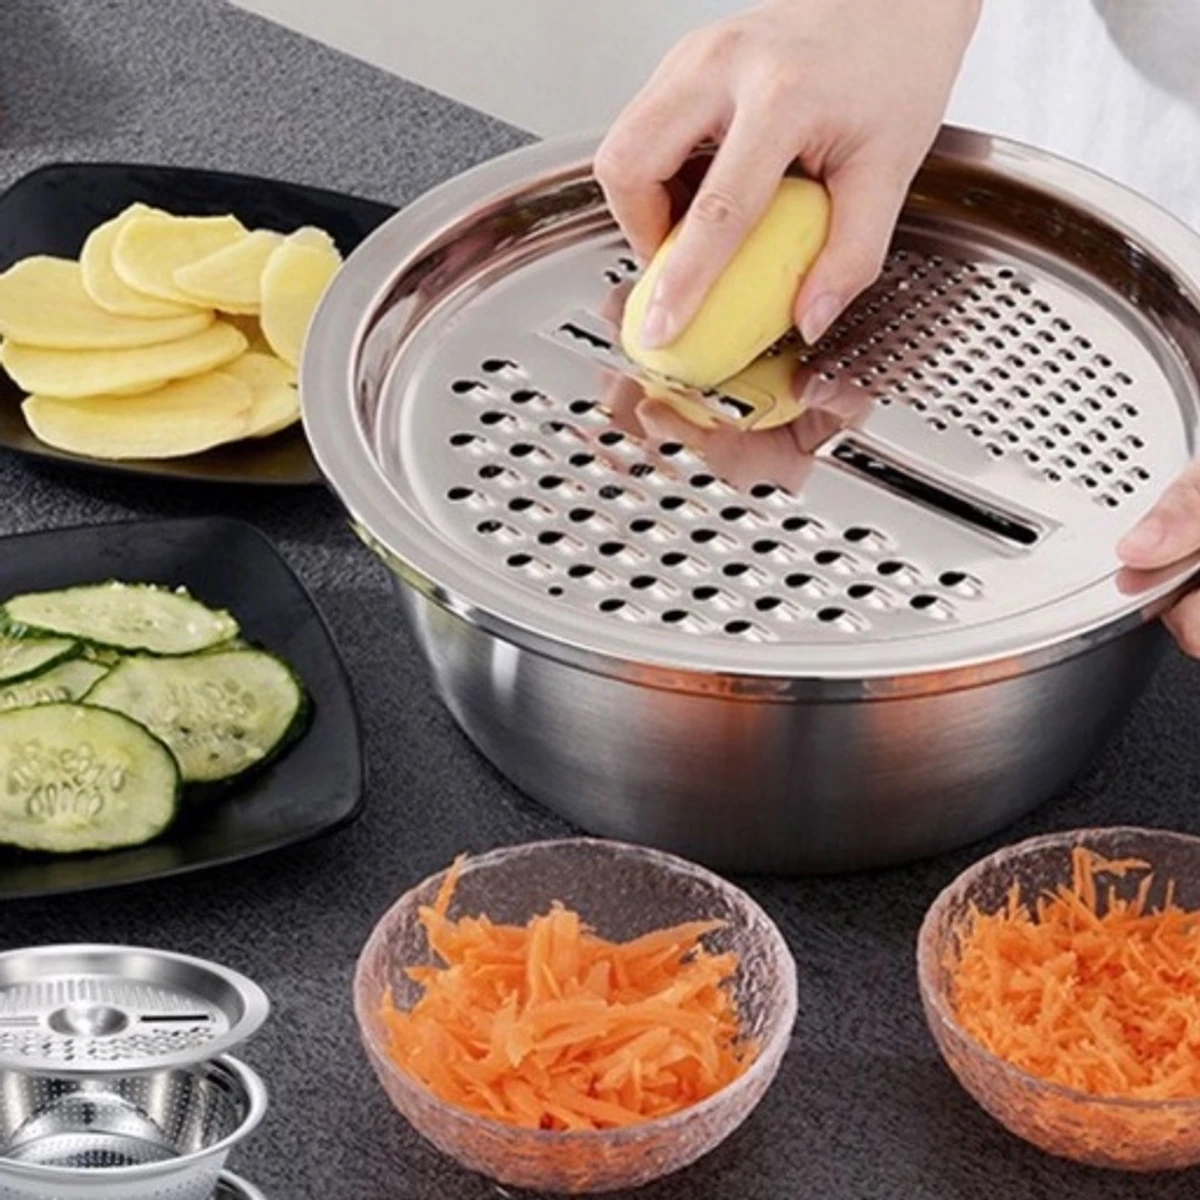 3 in 1 Vegetable Cutter with Drain Basket